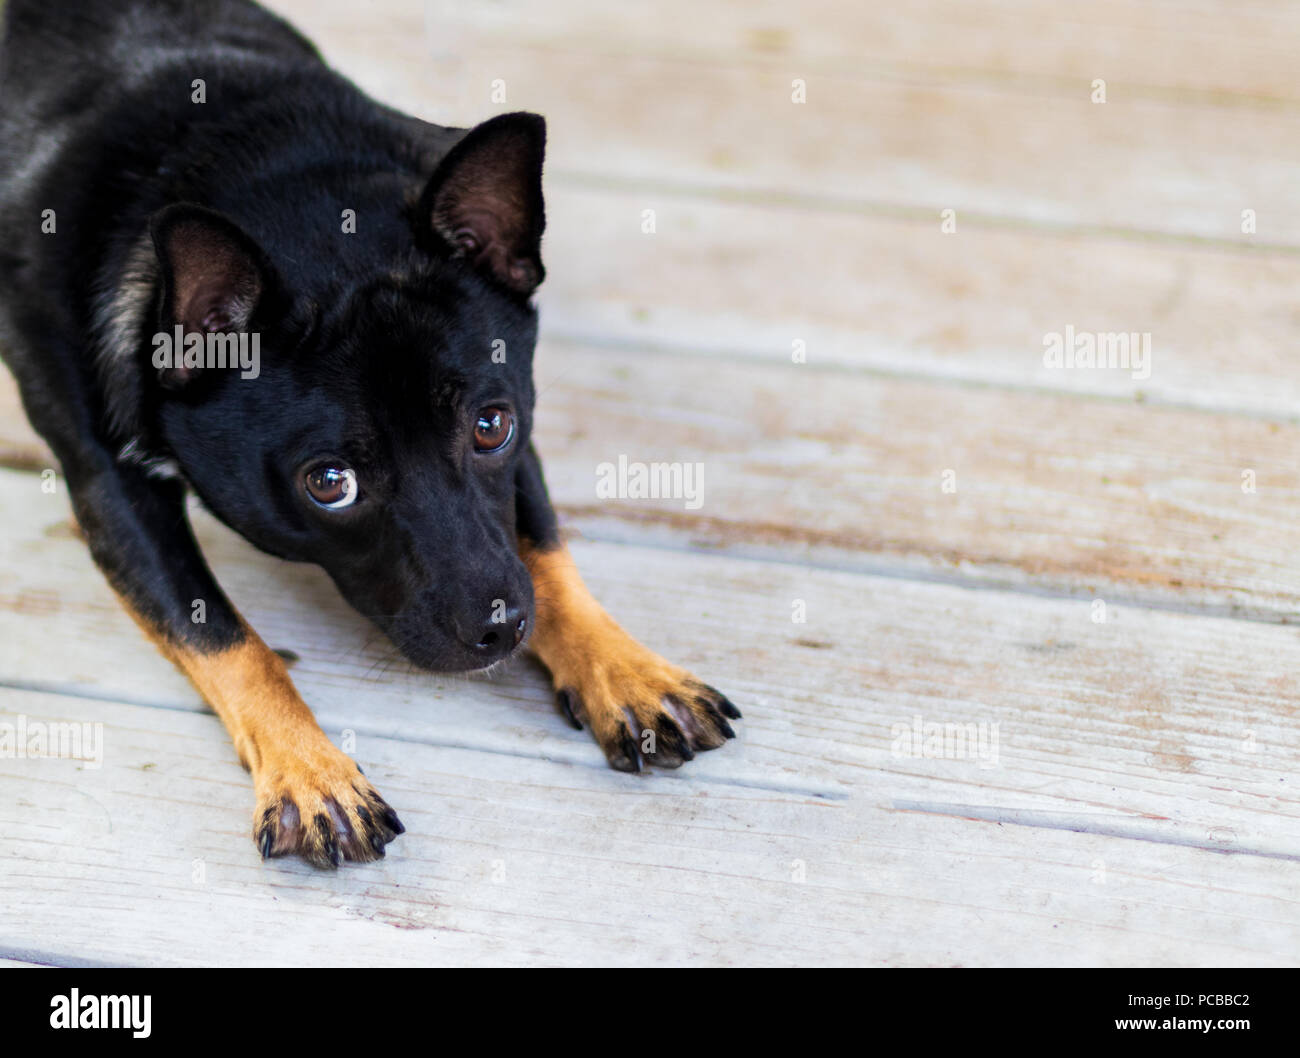 Adorable dog stretched out with innocent puppy dog eyes on a wooden porch Stock Photo